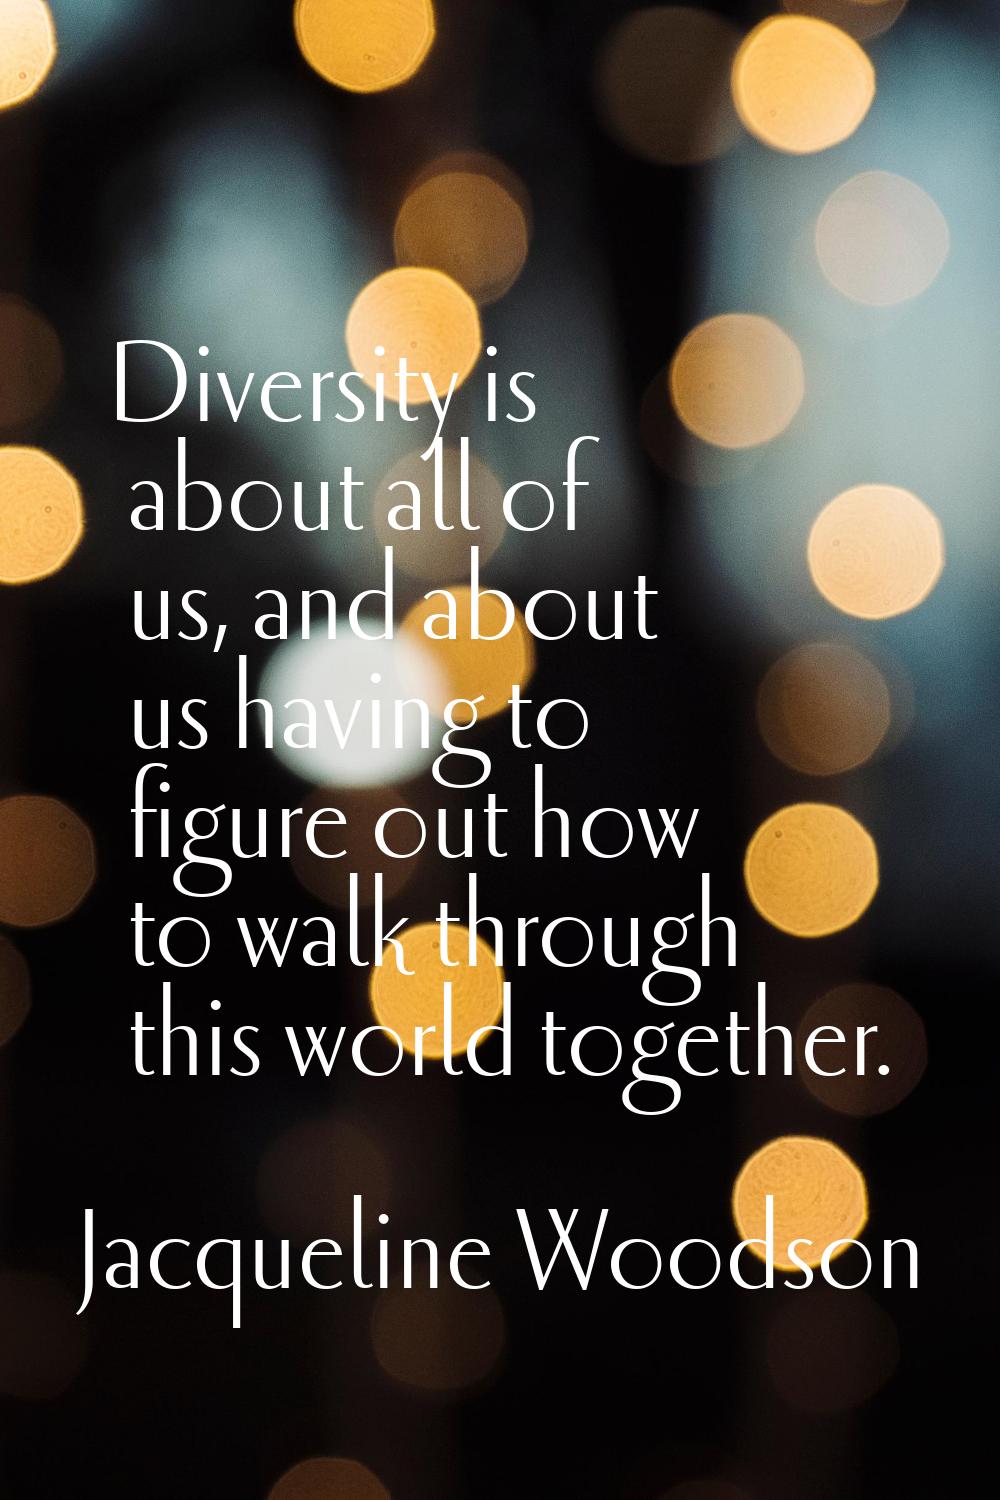 Diversity is about all of us, and about us having to figure out how to walk through this world toge